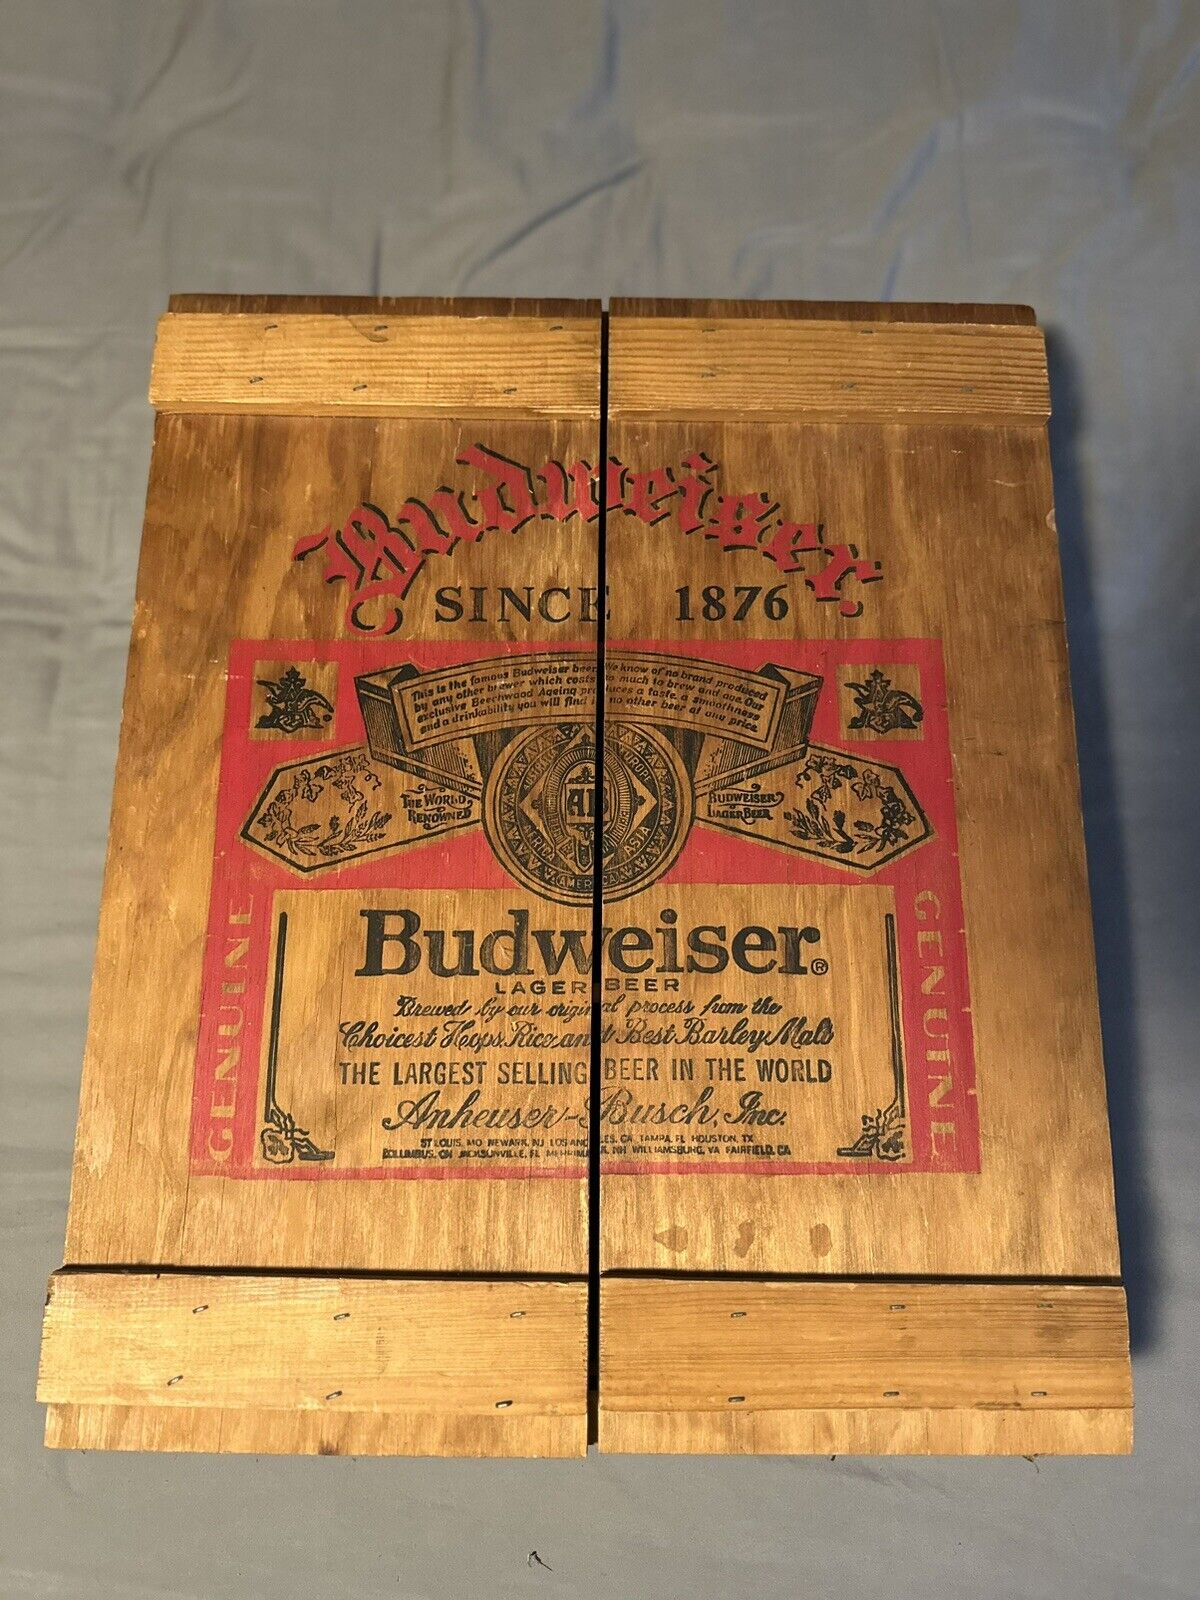 Budweiser Wood Display Crate Cabinet Box Shelves 15”x19”x4” Magnetic Closure